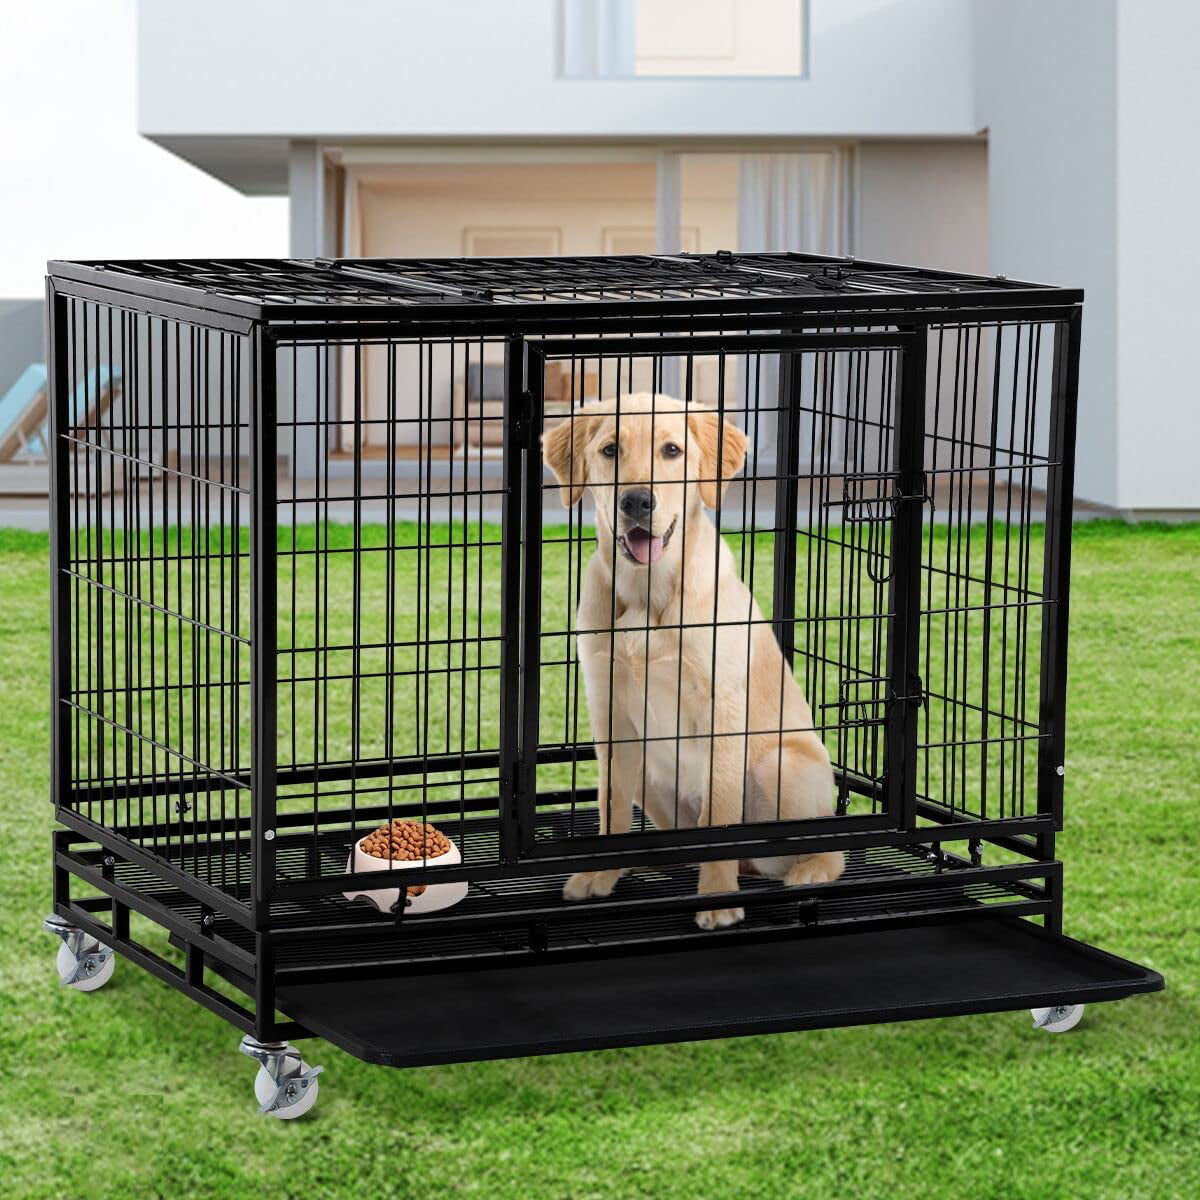 Dkelincs 42 inch Dog Cage Heavy Duty XL Dog Crate and Kennels with Wheels and Tray Dog Kennel with Double Doors for Dog Training